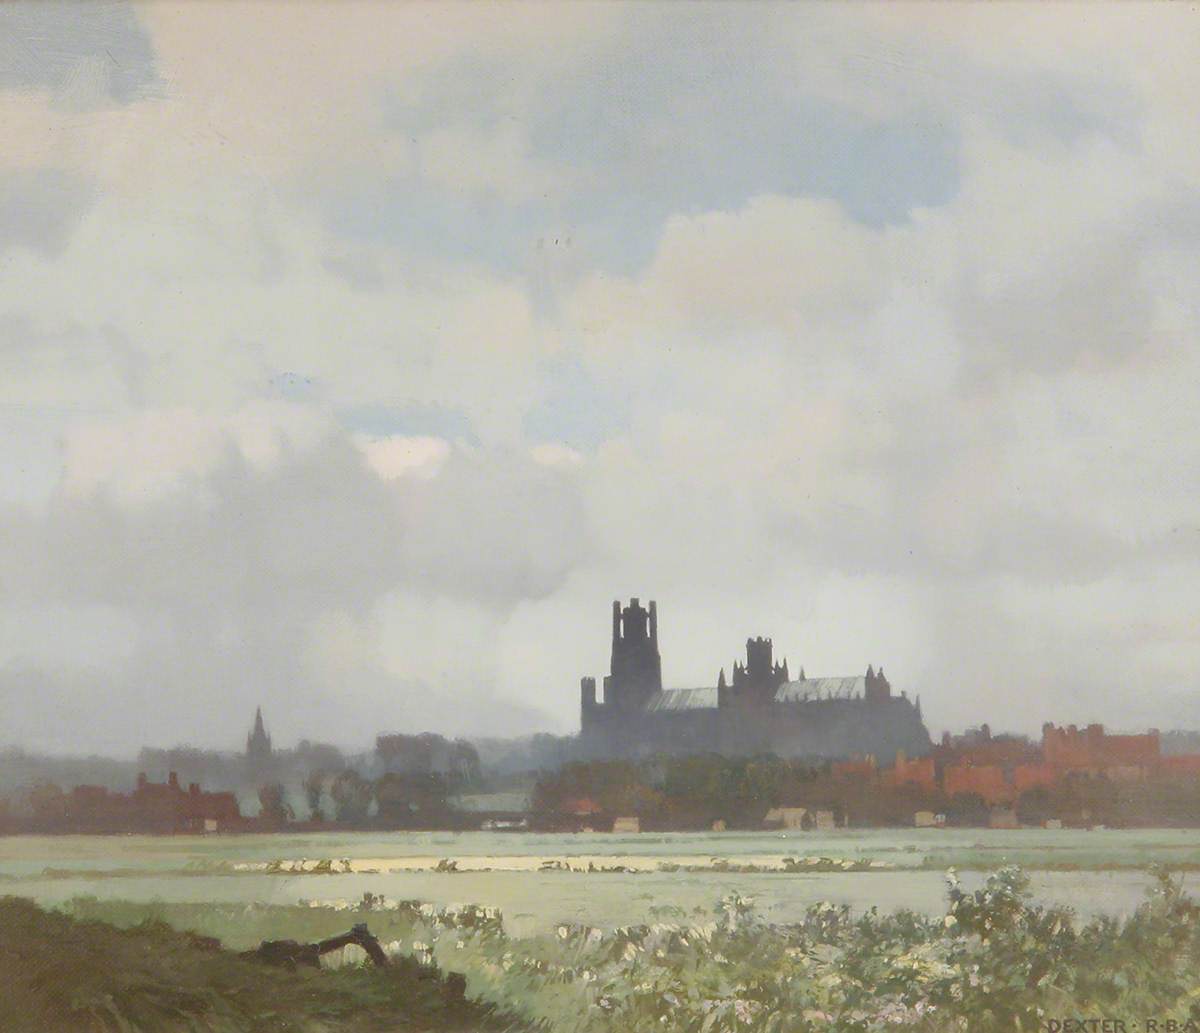 Ely from Middle Fen, Cambridgeshire